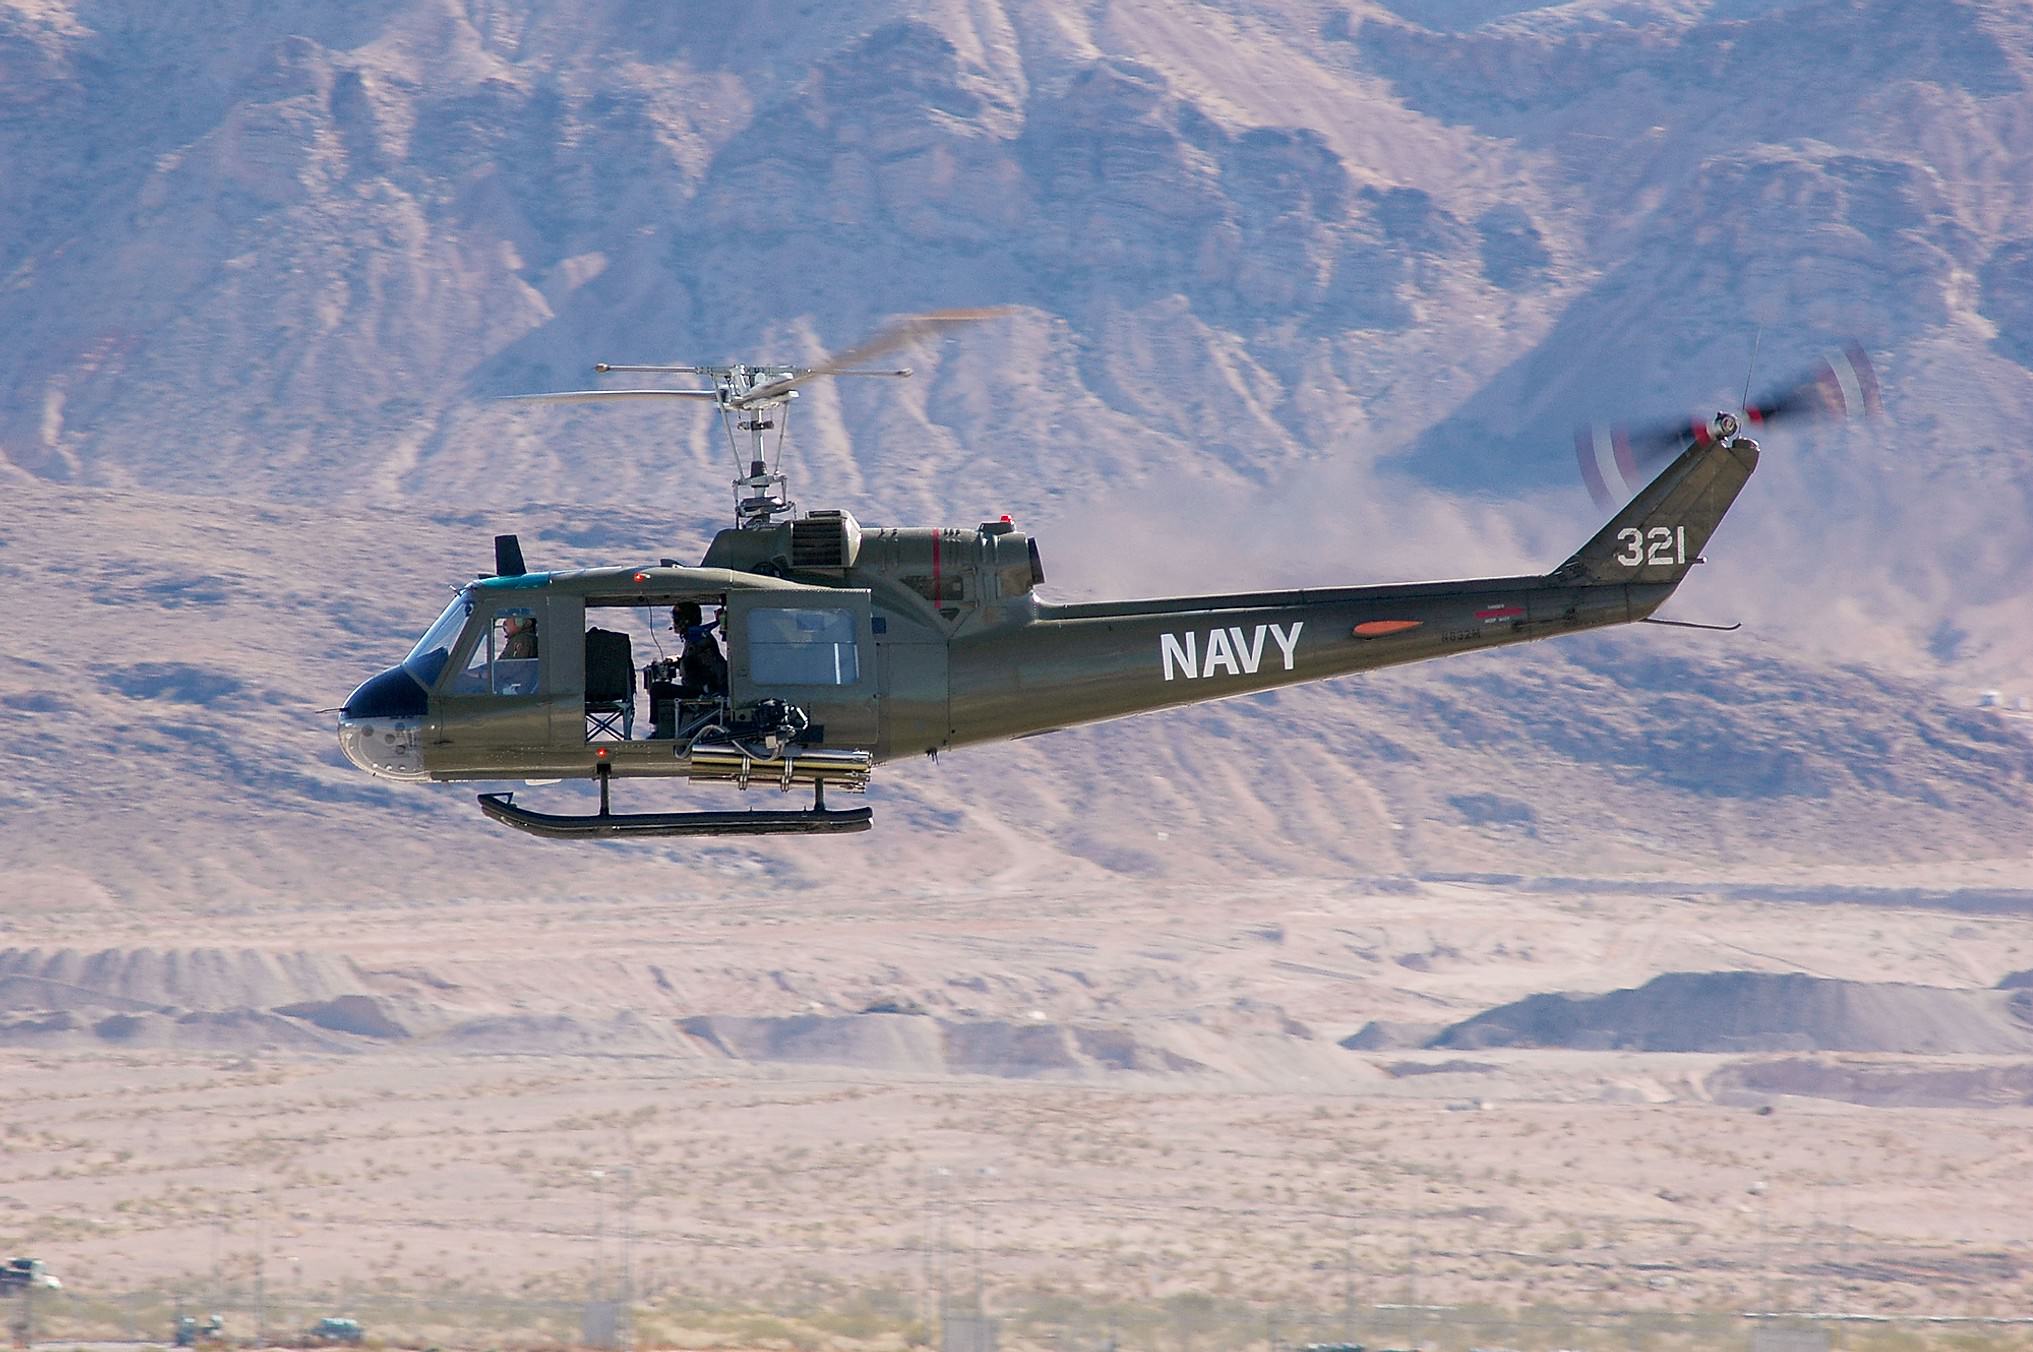 For Sale A Vietnam Veteran Bell Uh 1 B Huey Helicopter 165 000 Usd